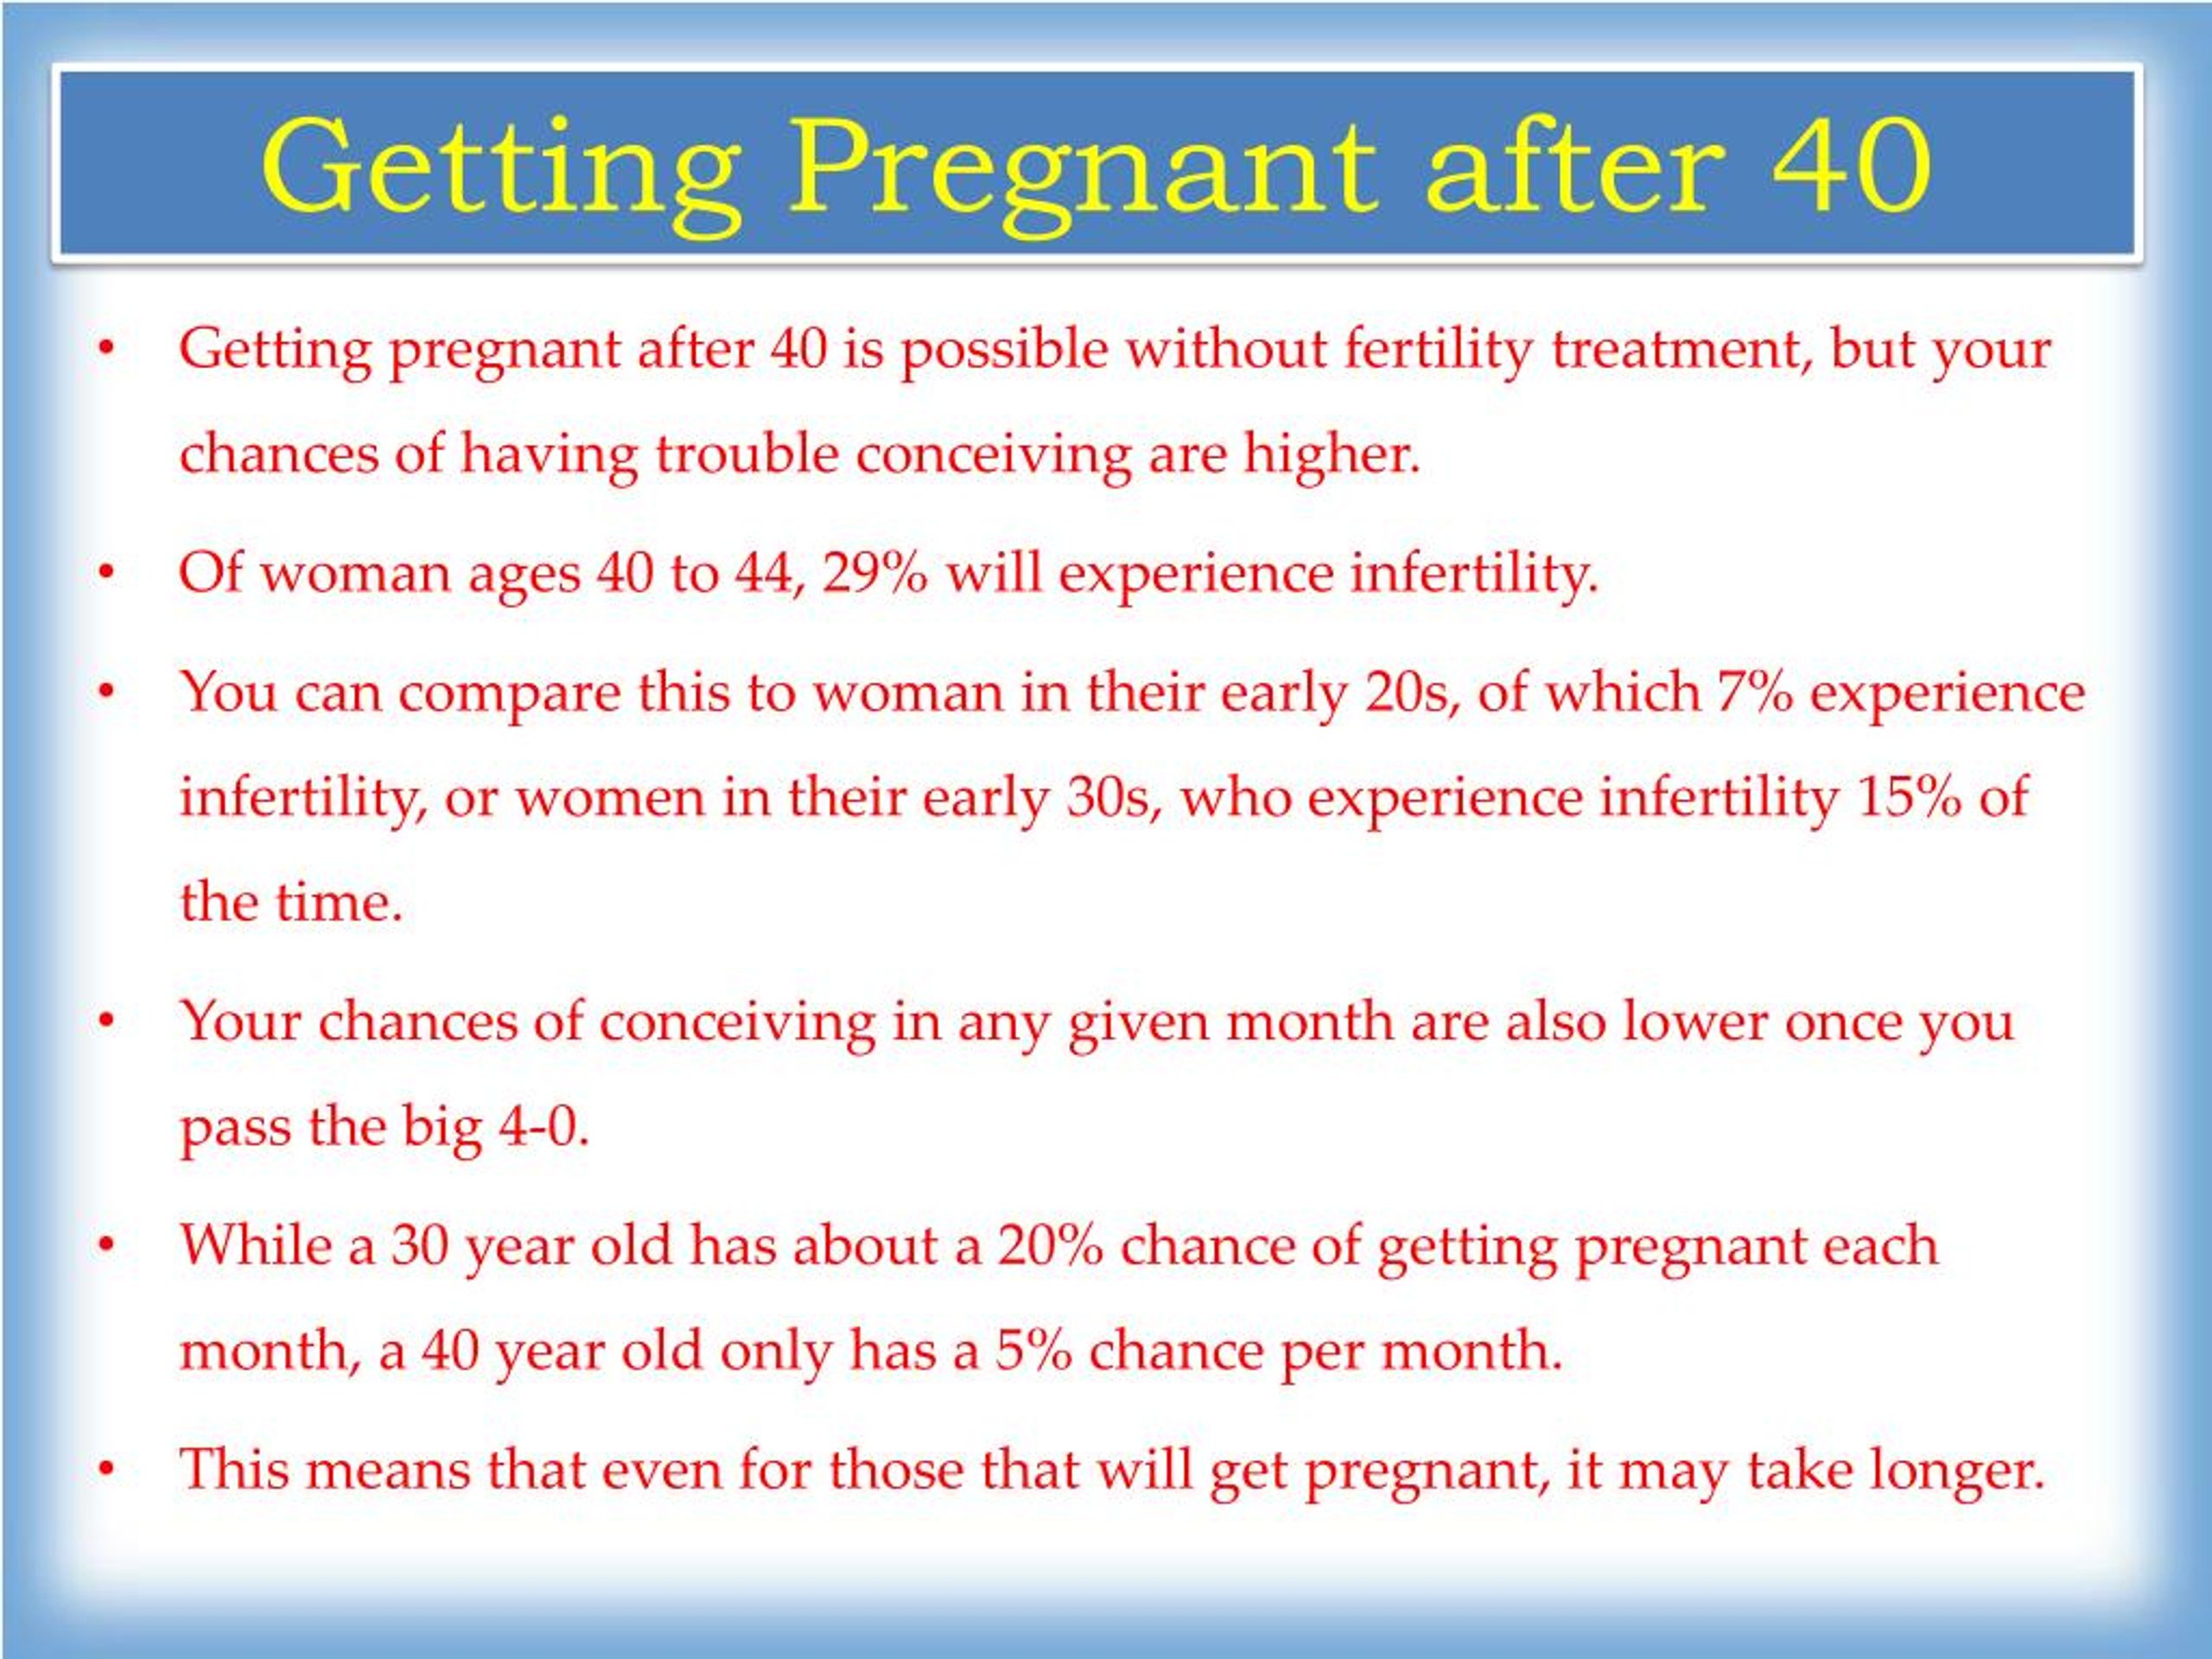 What Are the Chances of Getting Pregnant After 40?